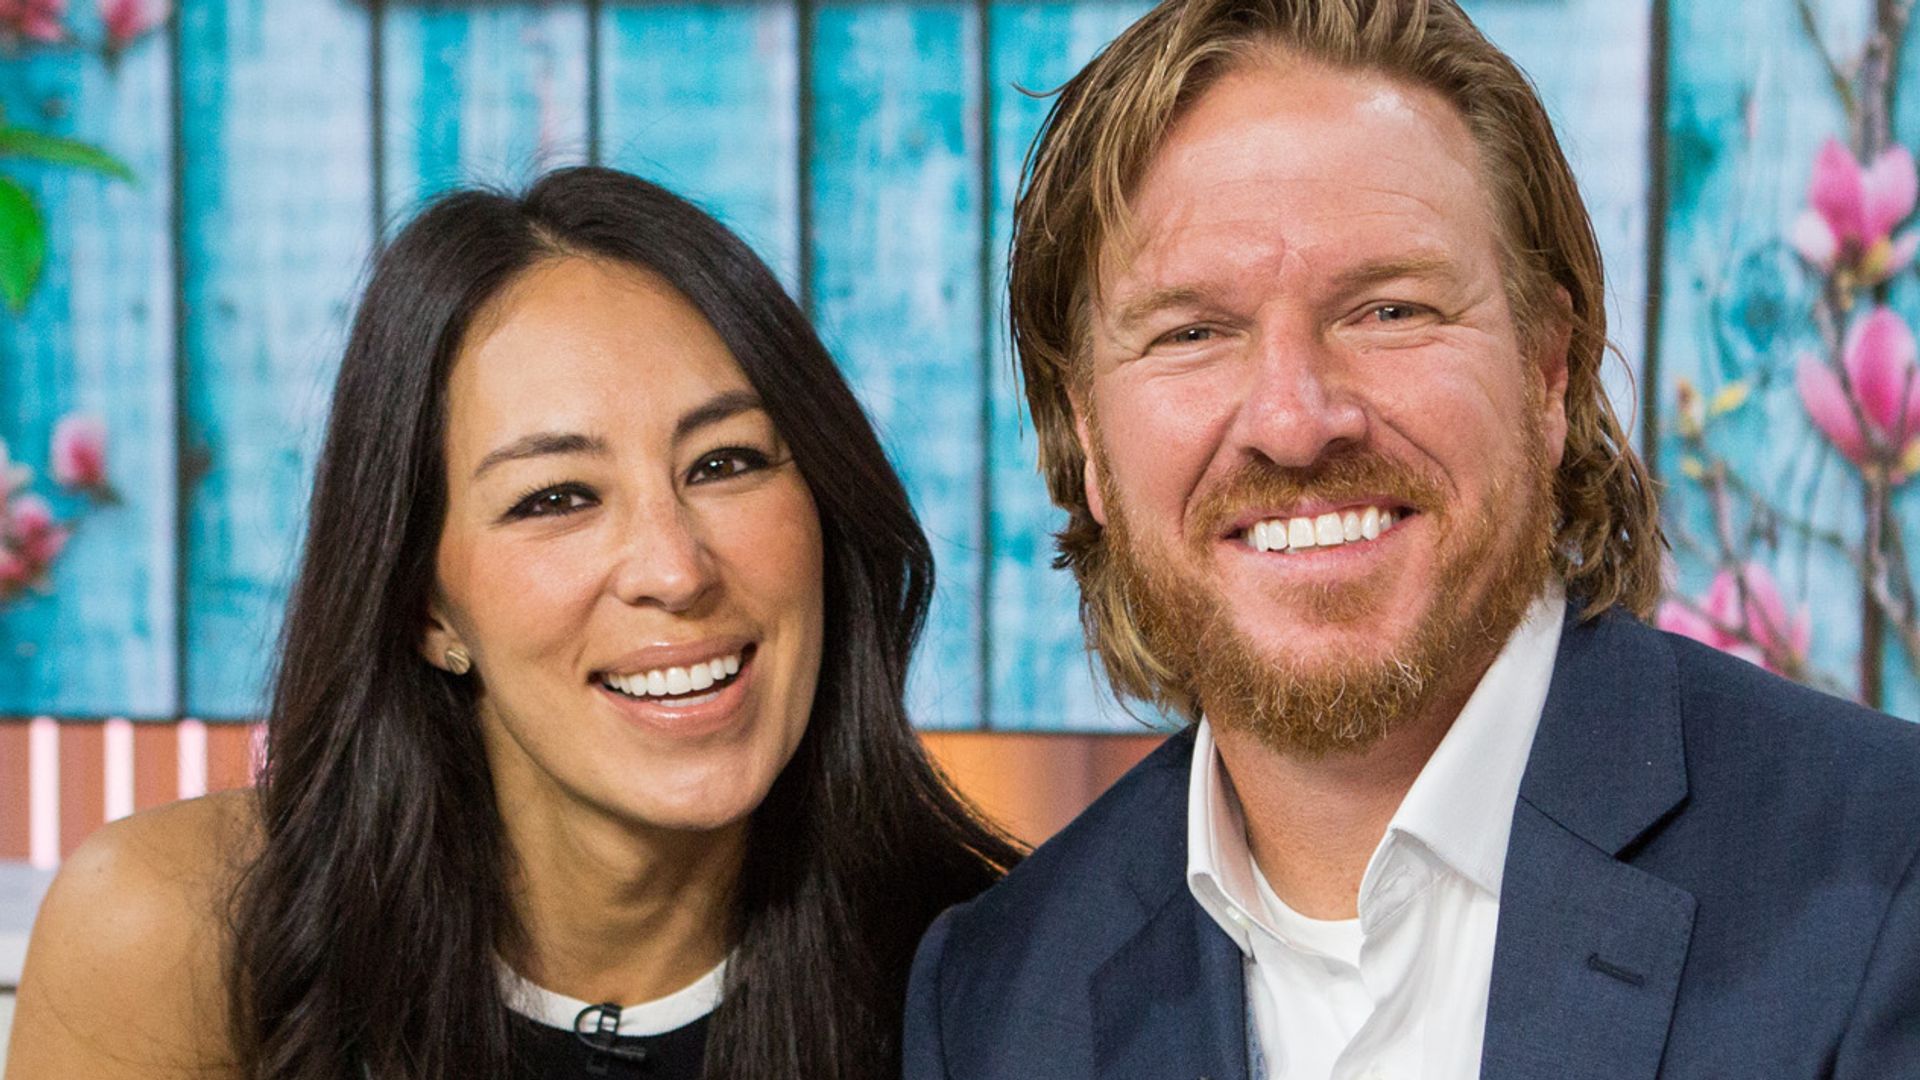 Joanna, Chip Gaines of 'Fixer Upper' talk marriage and season of